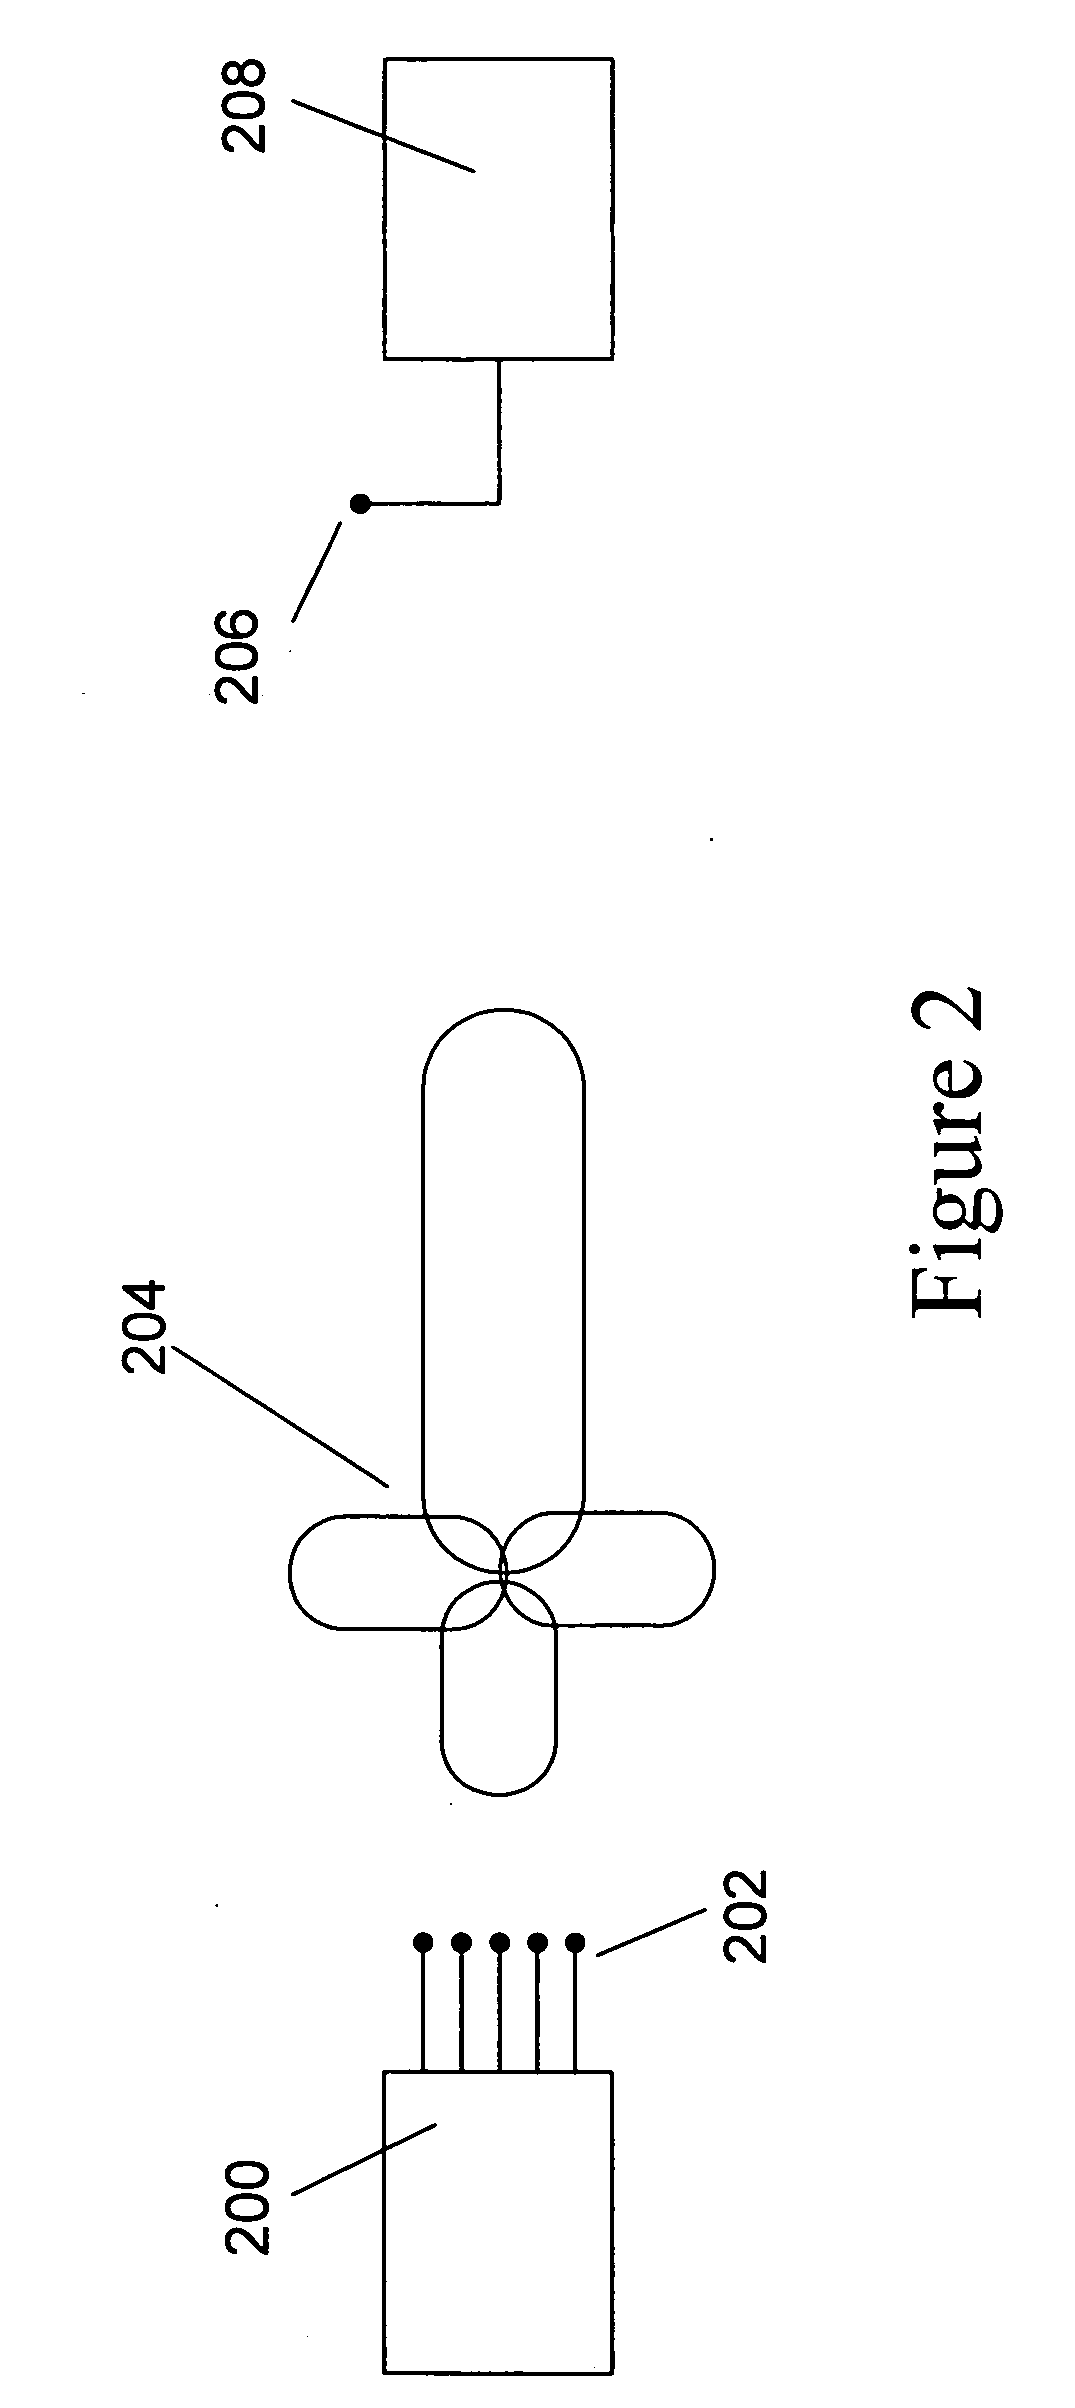 Systems and methods for calibrating transmission of an antenna array